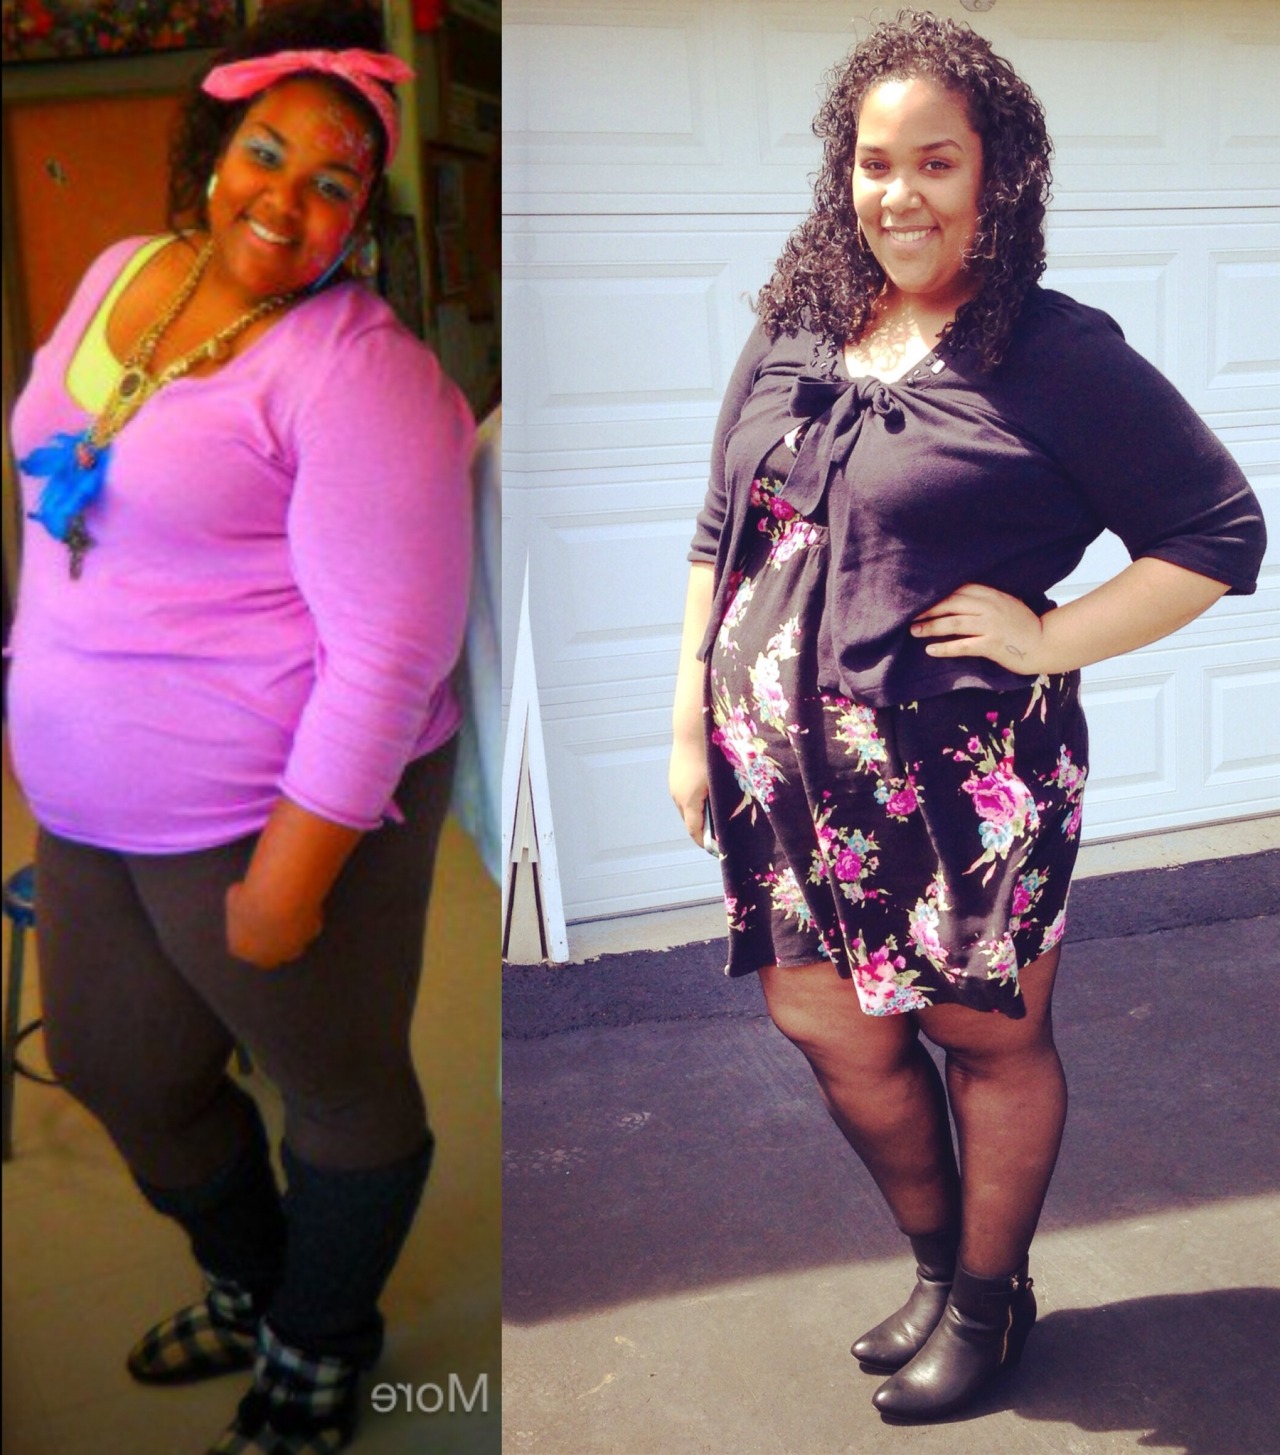 Hey I’m Jacqueline! Im 20 years old and 5’11” Left photo was me in high-school at my highest weight ever 385lbs Right photo was me on Easter 2014 at 315lbs I have been plateauing for last 4 months and its extremely hard to keep going when I feel as if nothing is happening but it is always good to look back to this photo and see how far I have come. If you would like to follow me along my journey, heres my blog.